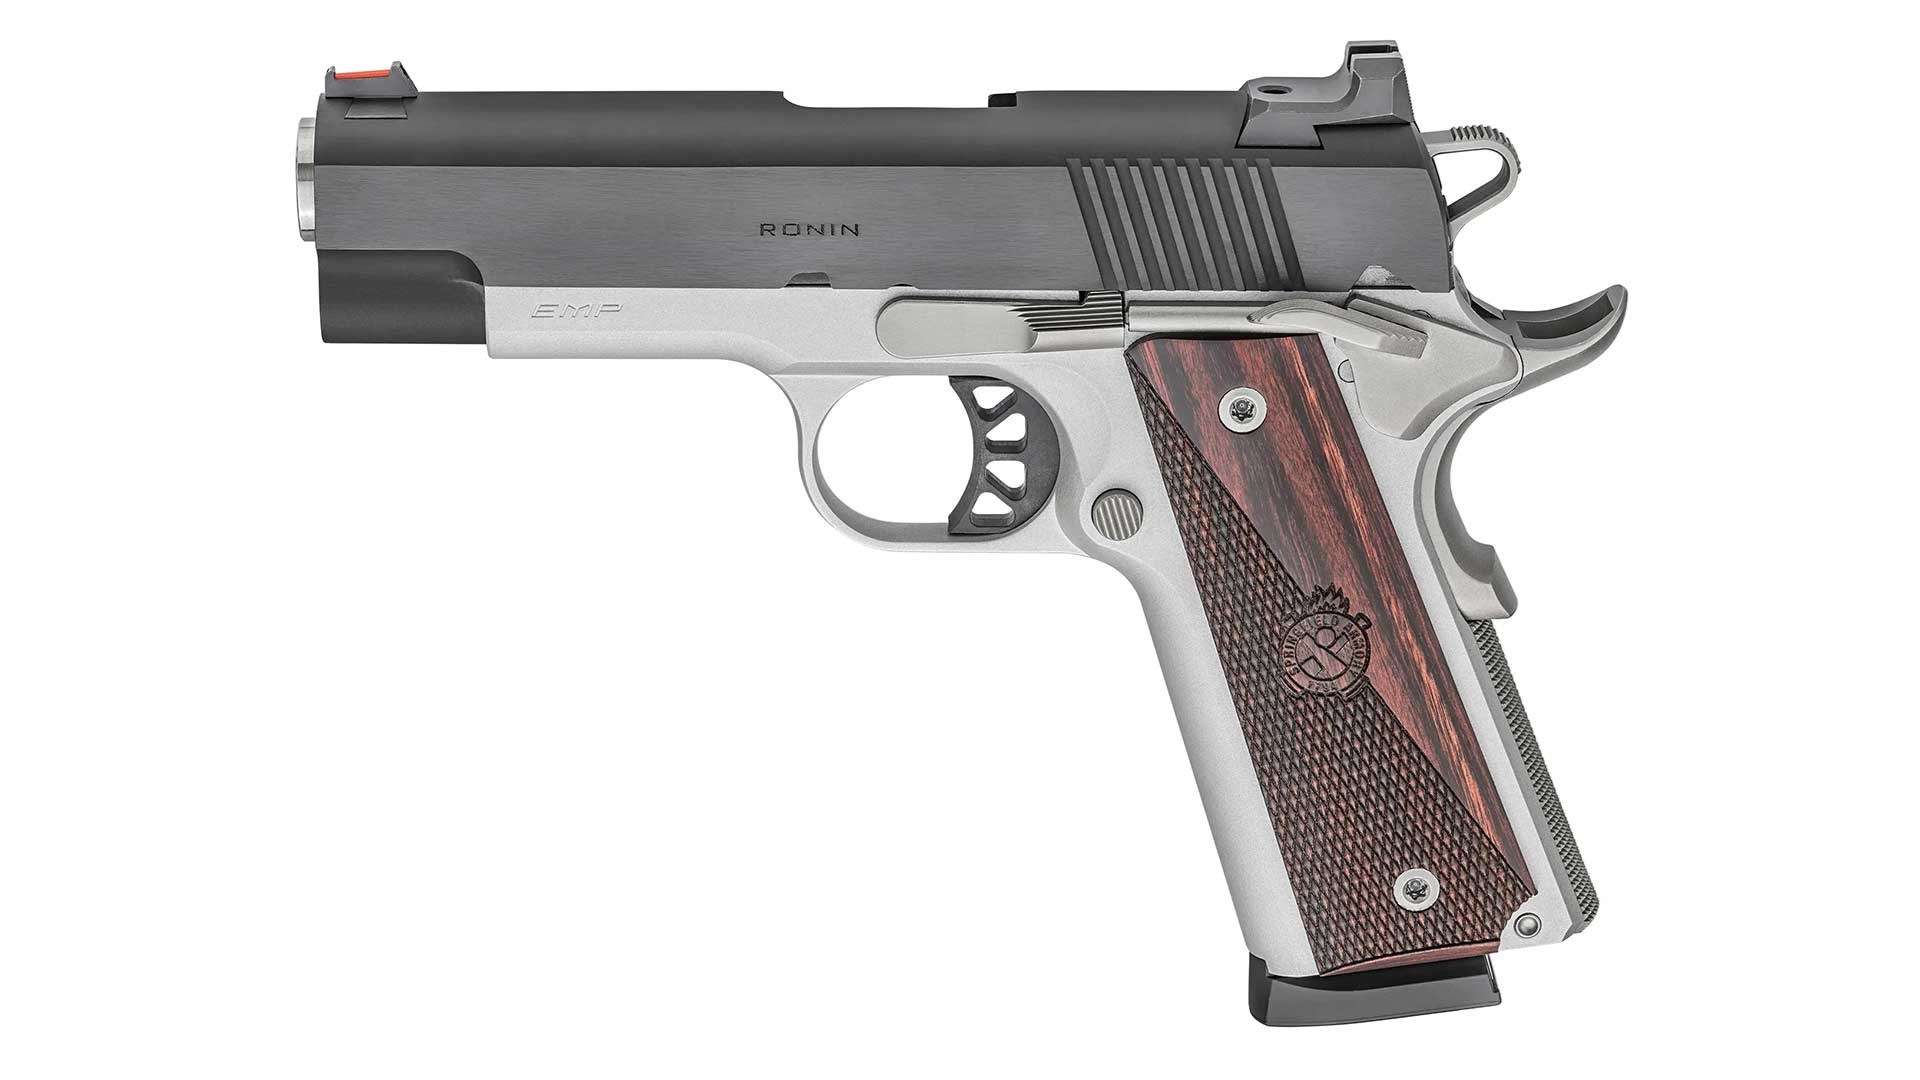 Springfield Armory Ronin EMP 1911 4" model's left side shown on white.